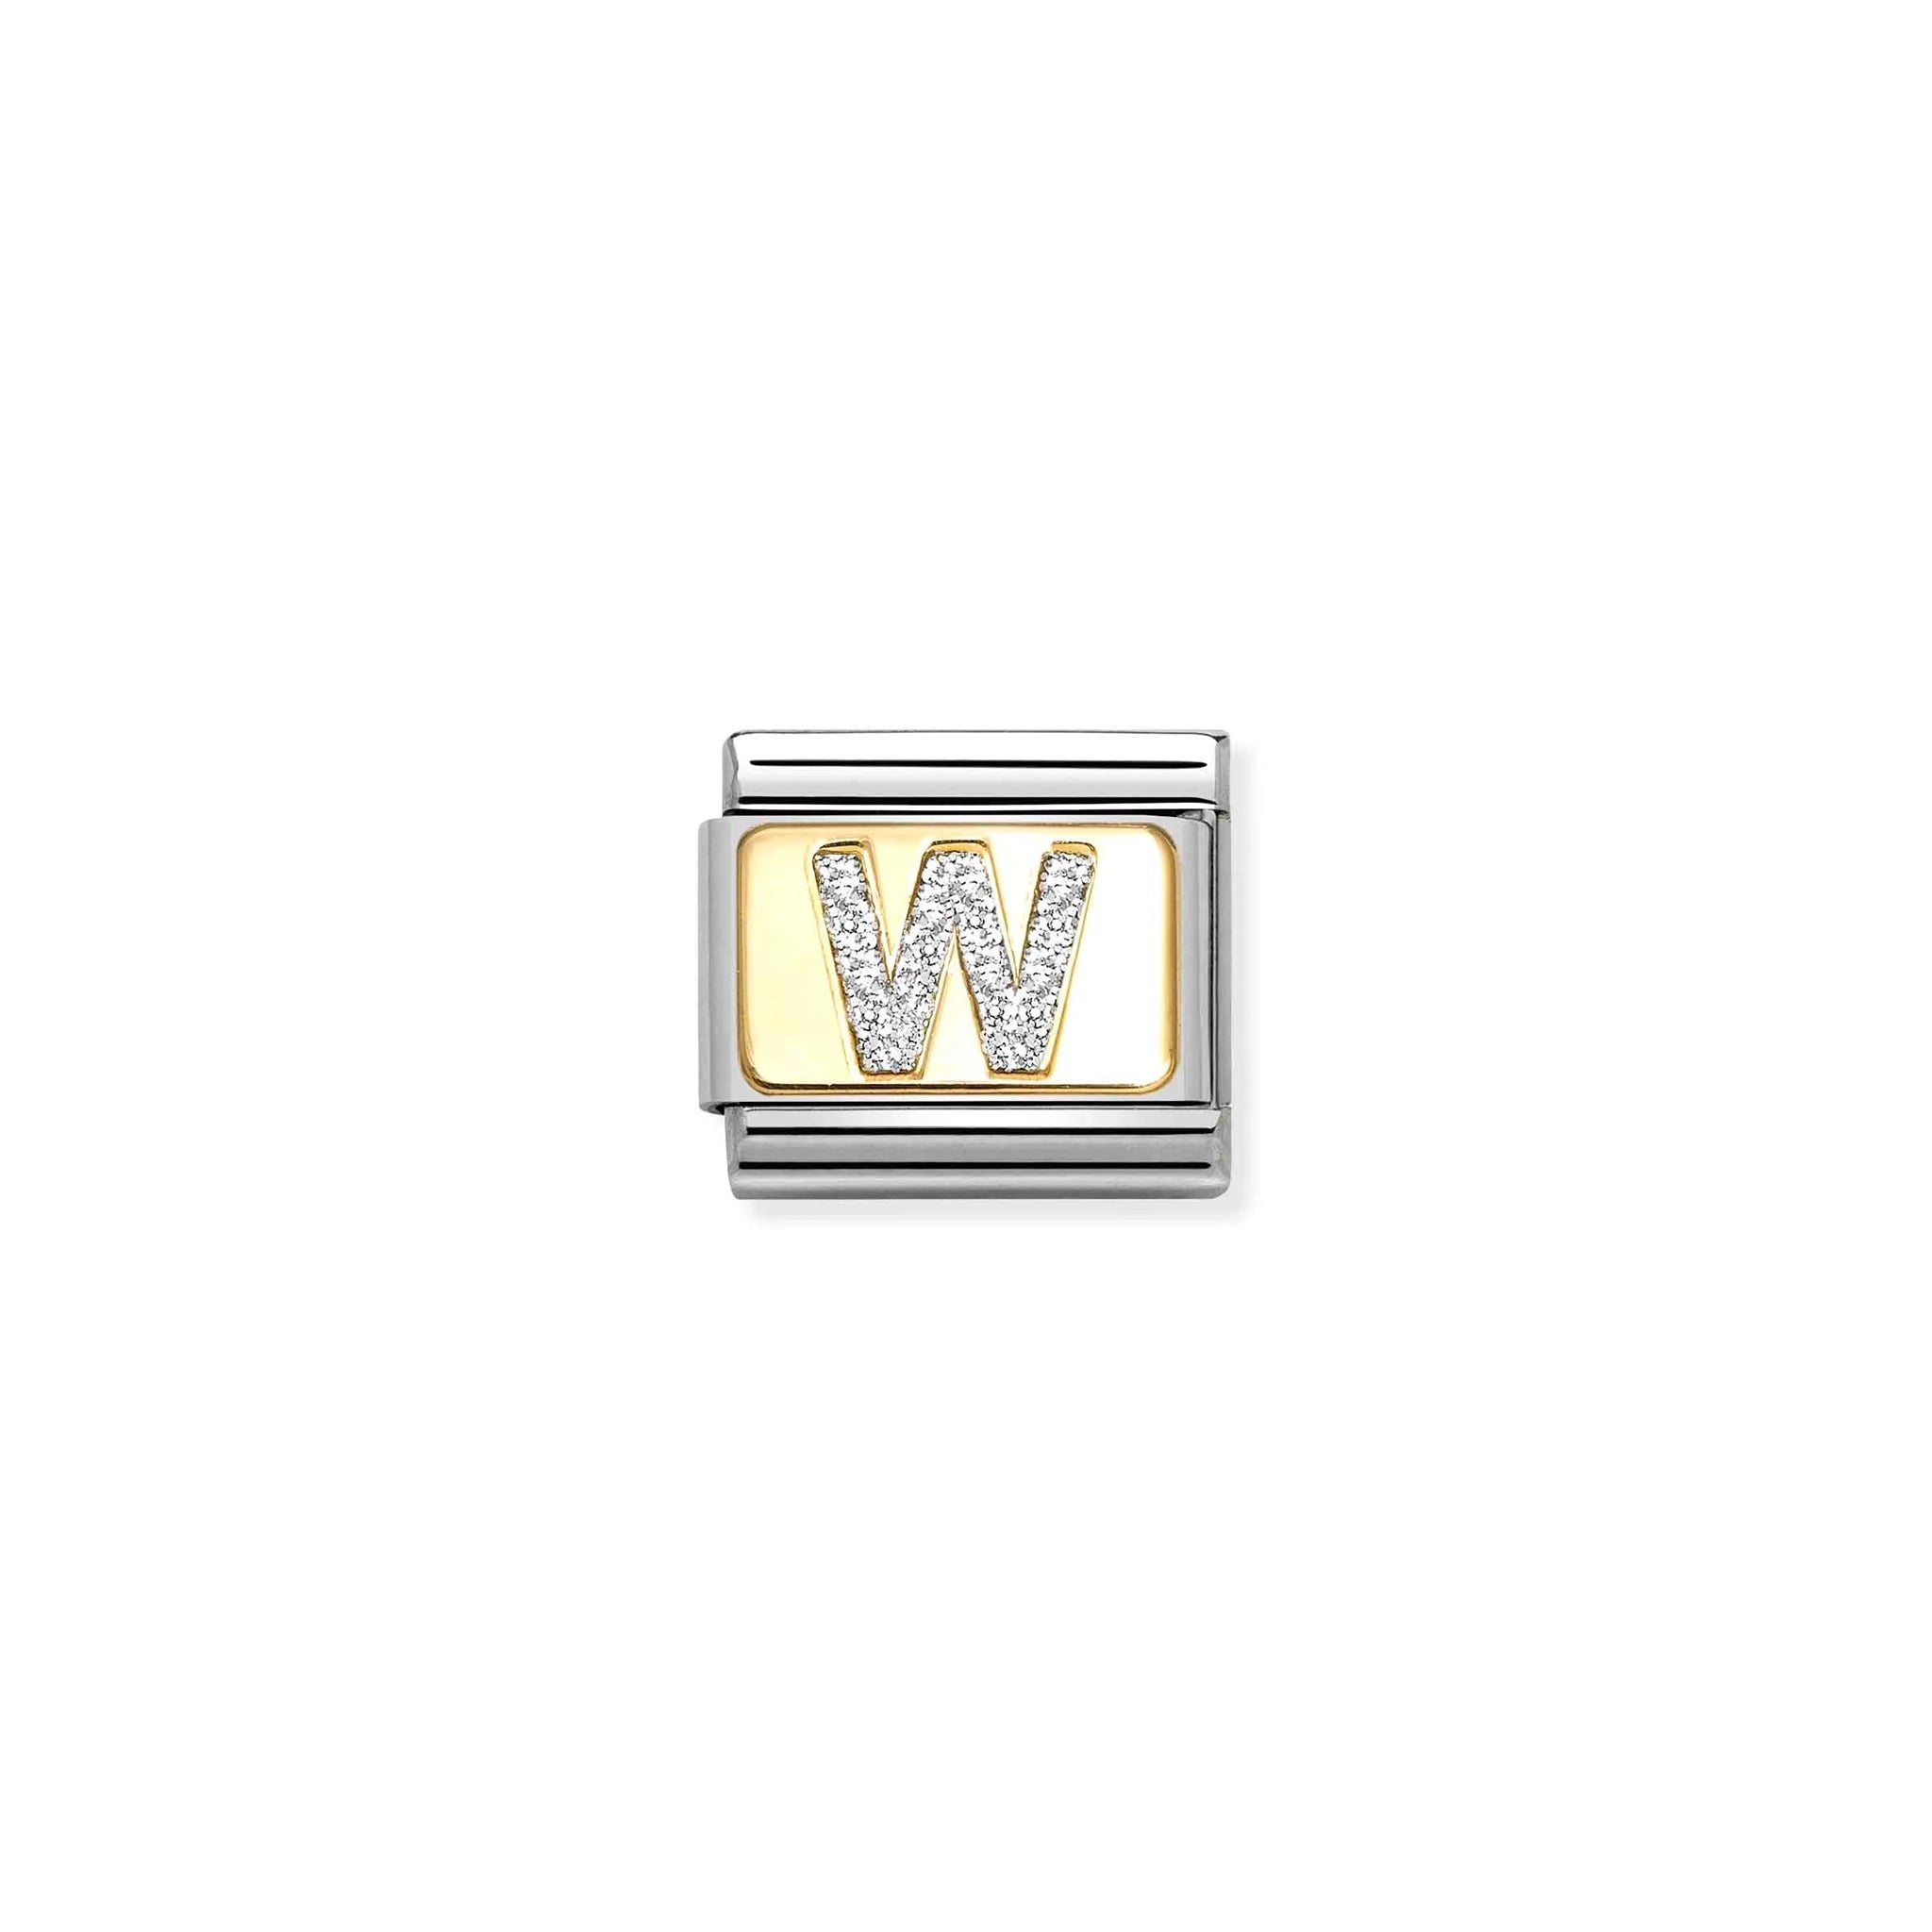 Nomination charm link featuring a gold plaque with a silver glitter letter W